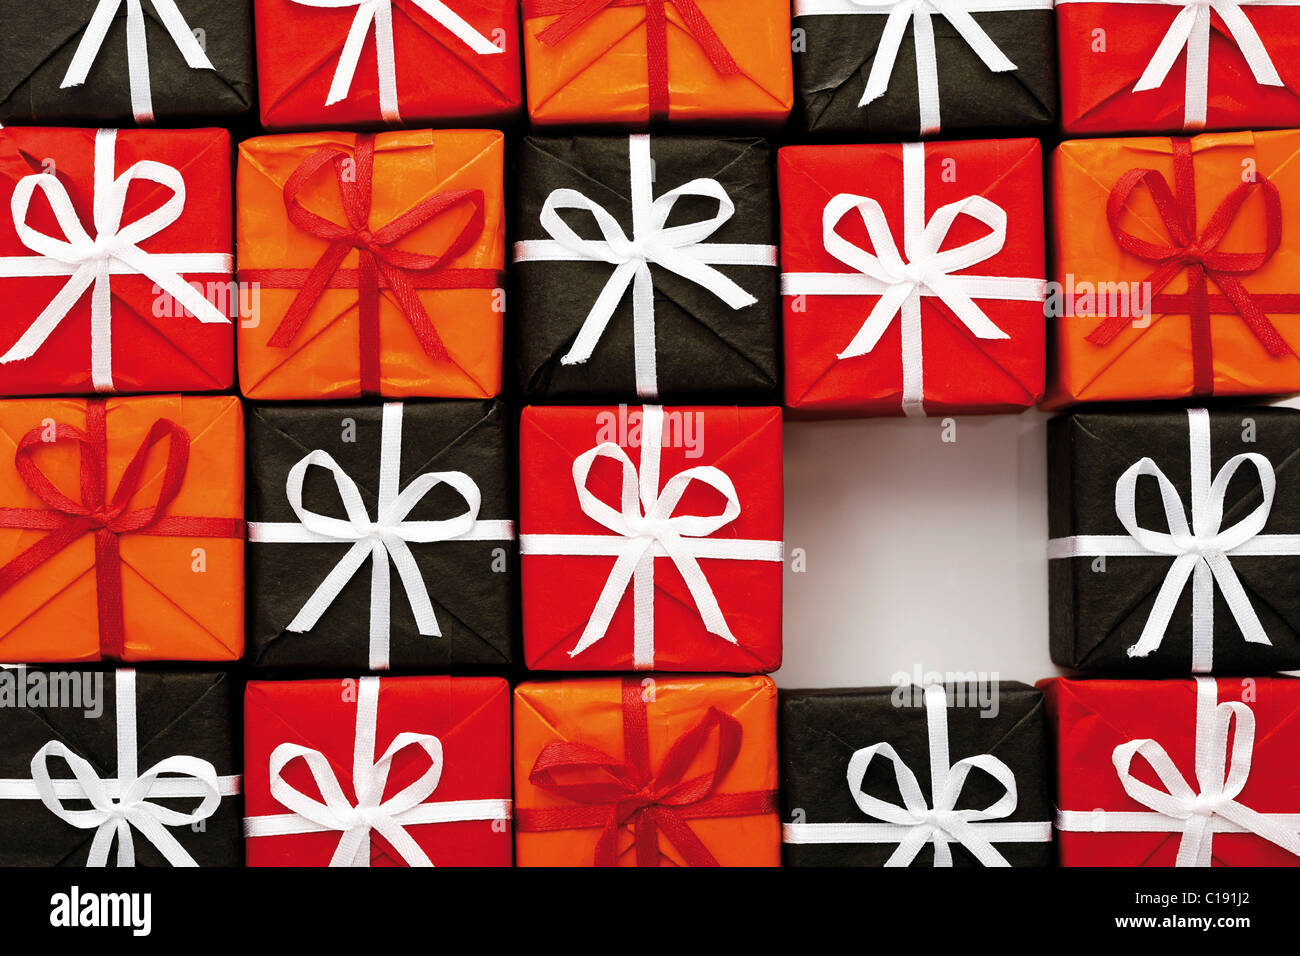 Multitude of gift parcels, presents joined together with one open space Stock Photo